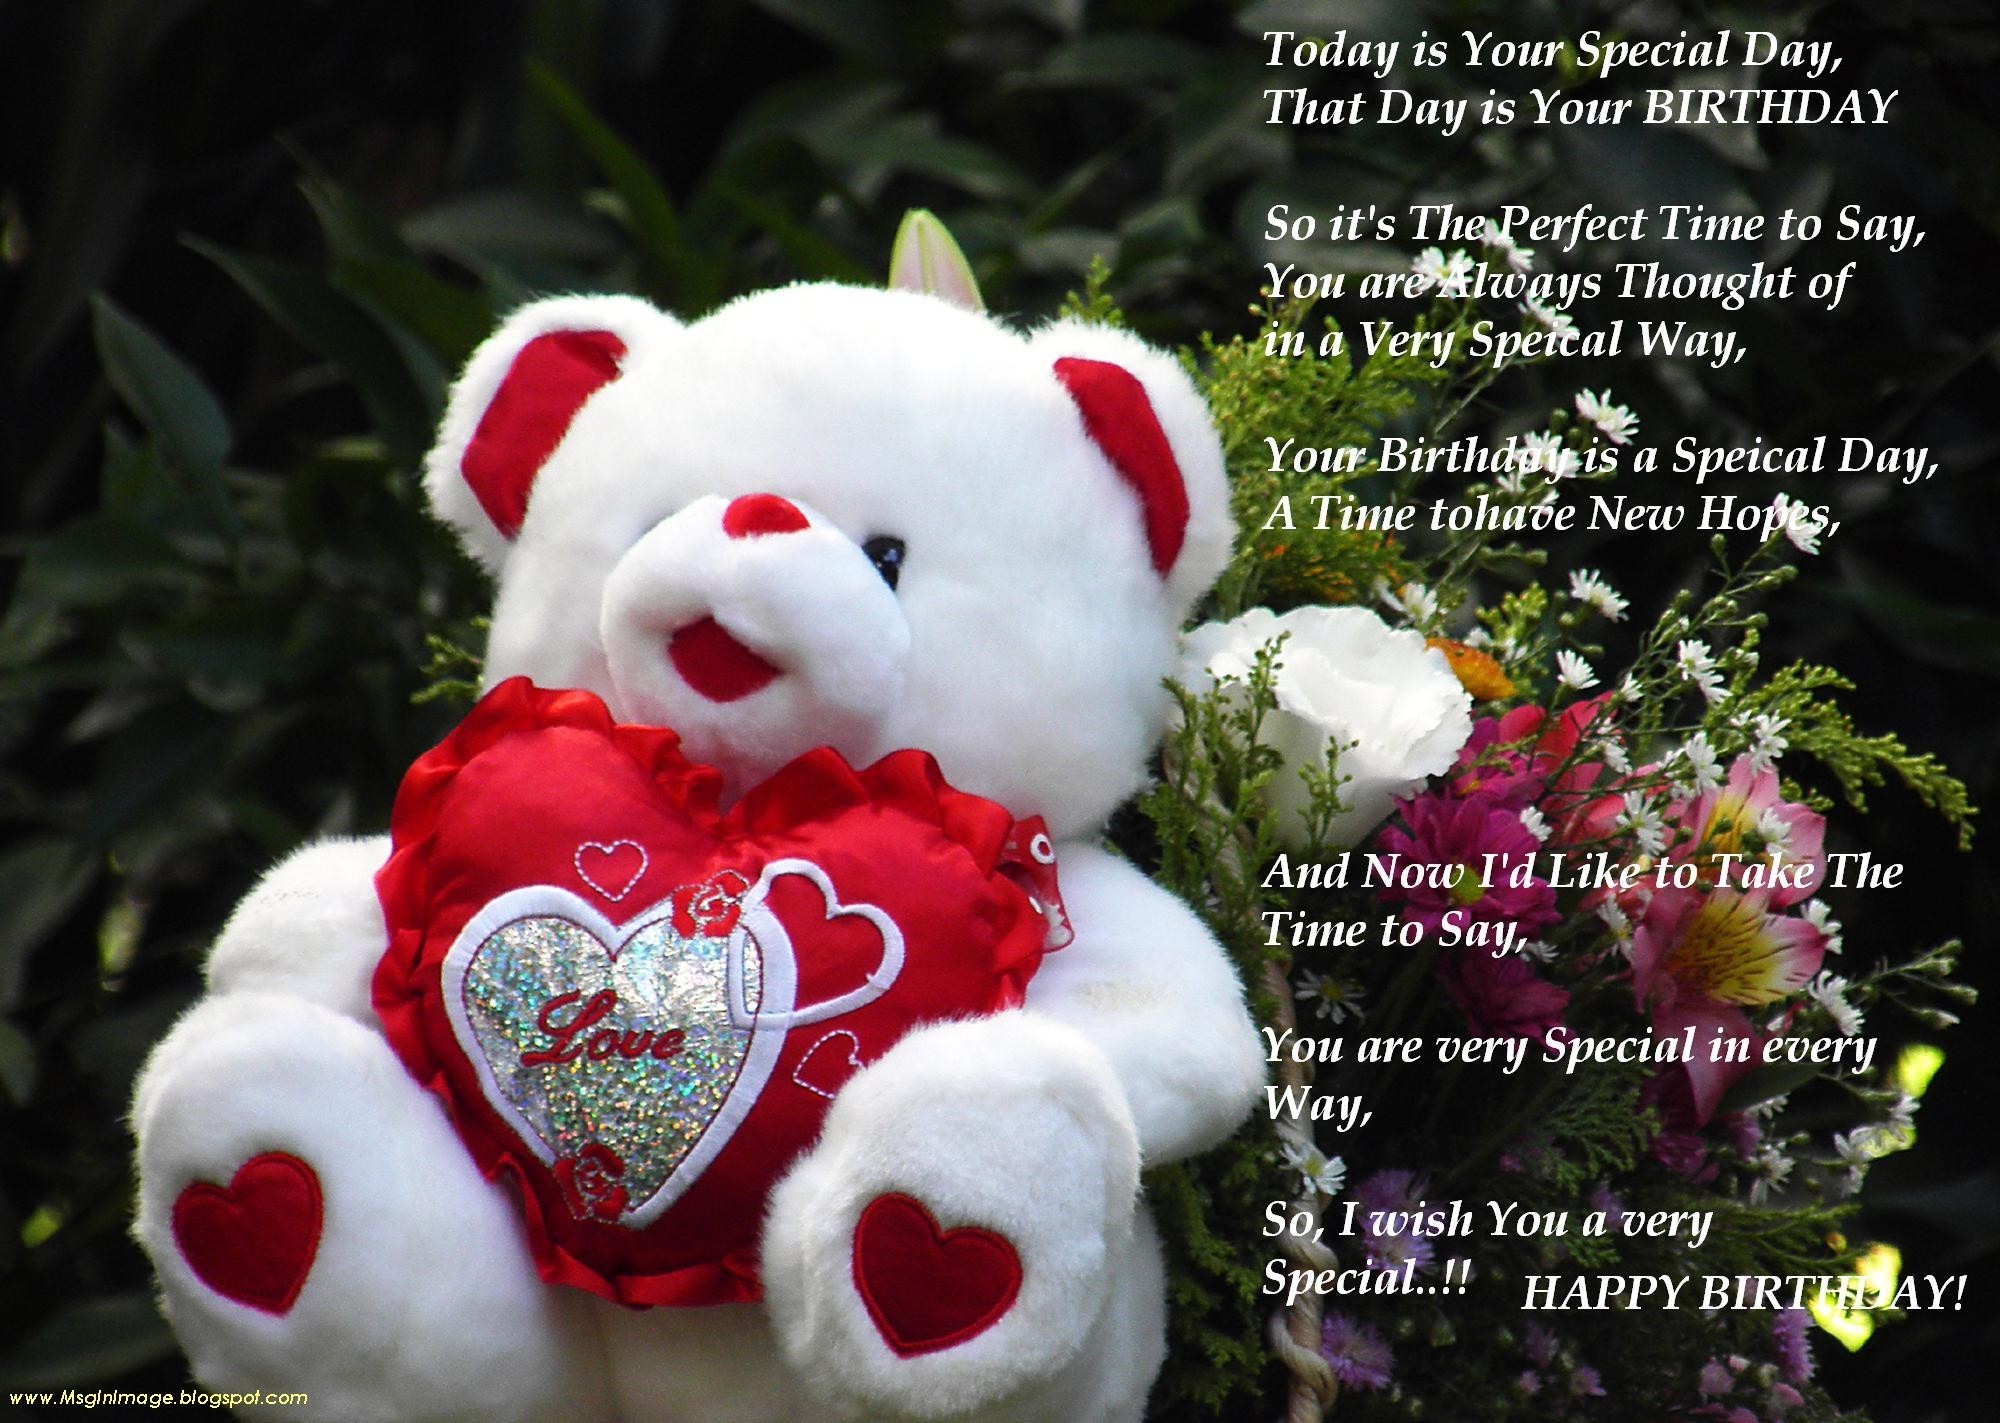 Glamorous Romantic Birthday Wishes - Romantic Birthday Wishes To Friend , HD Wallpaper & Backgrounds